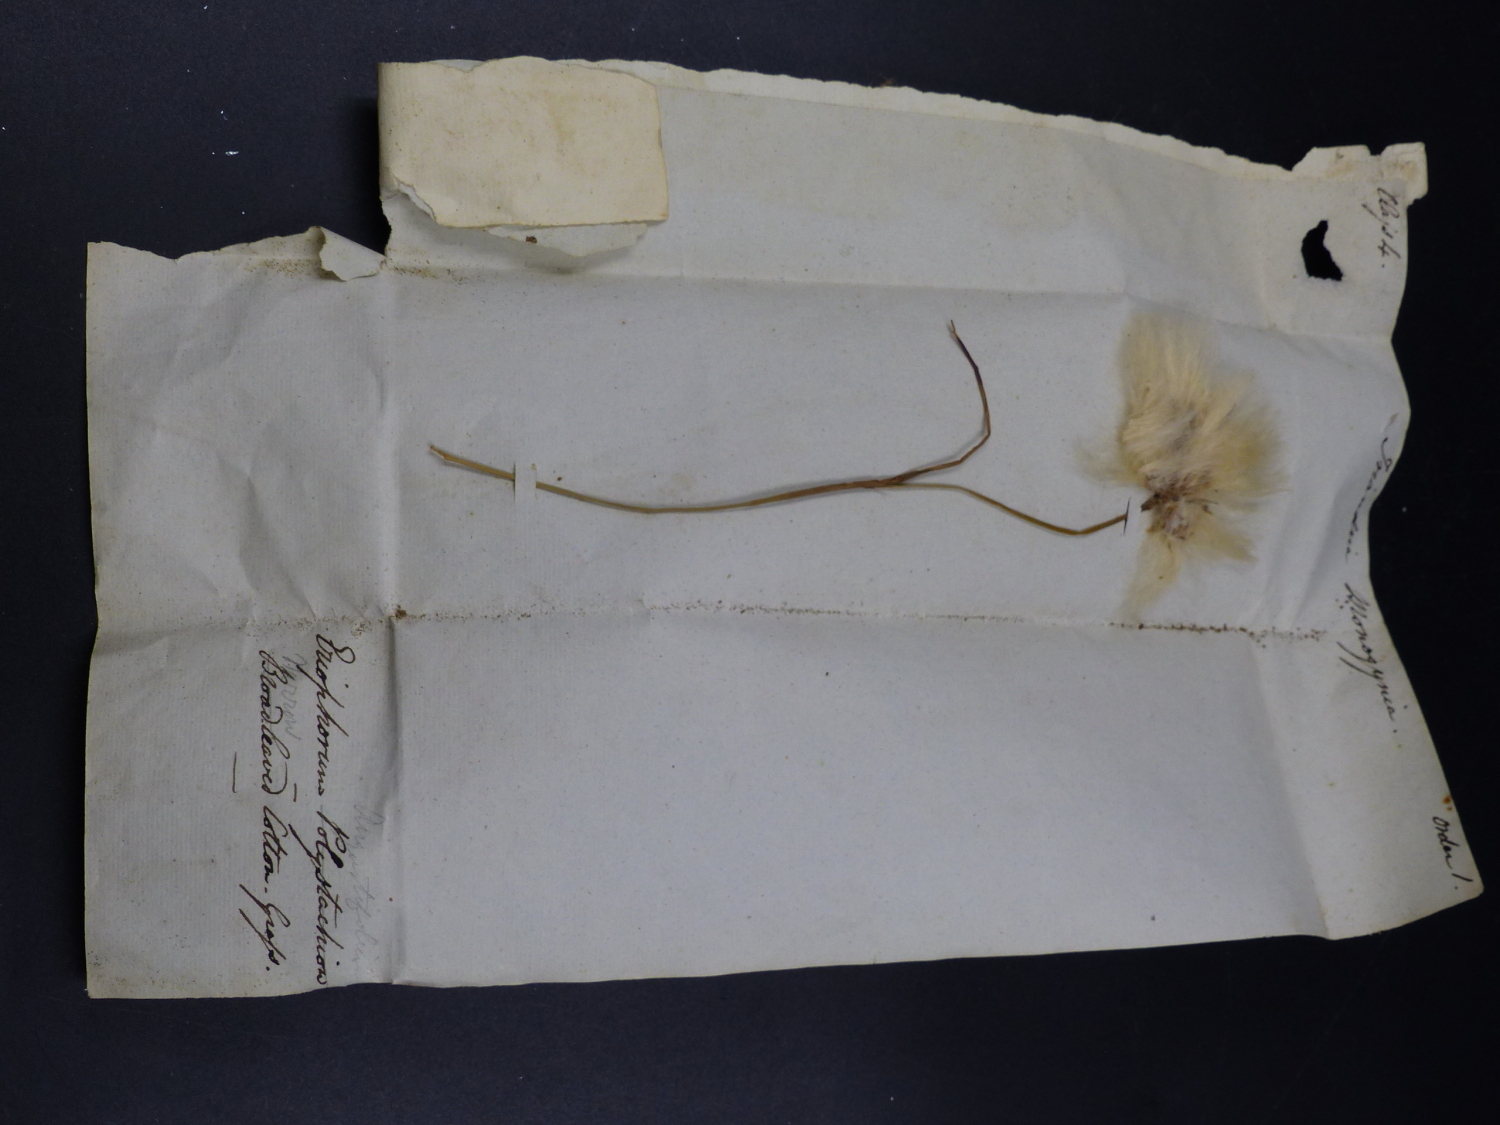 SPECIMENS OF SANDWICH ISLAND TAPA CLOTH, A PRESSED COTTON STEM TOGETHER WITH 39 INDIAN HAND - Image 21 of 35